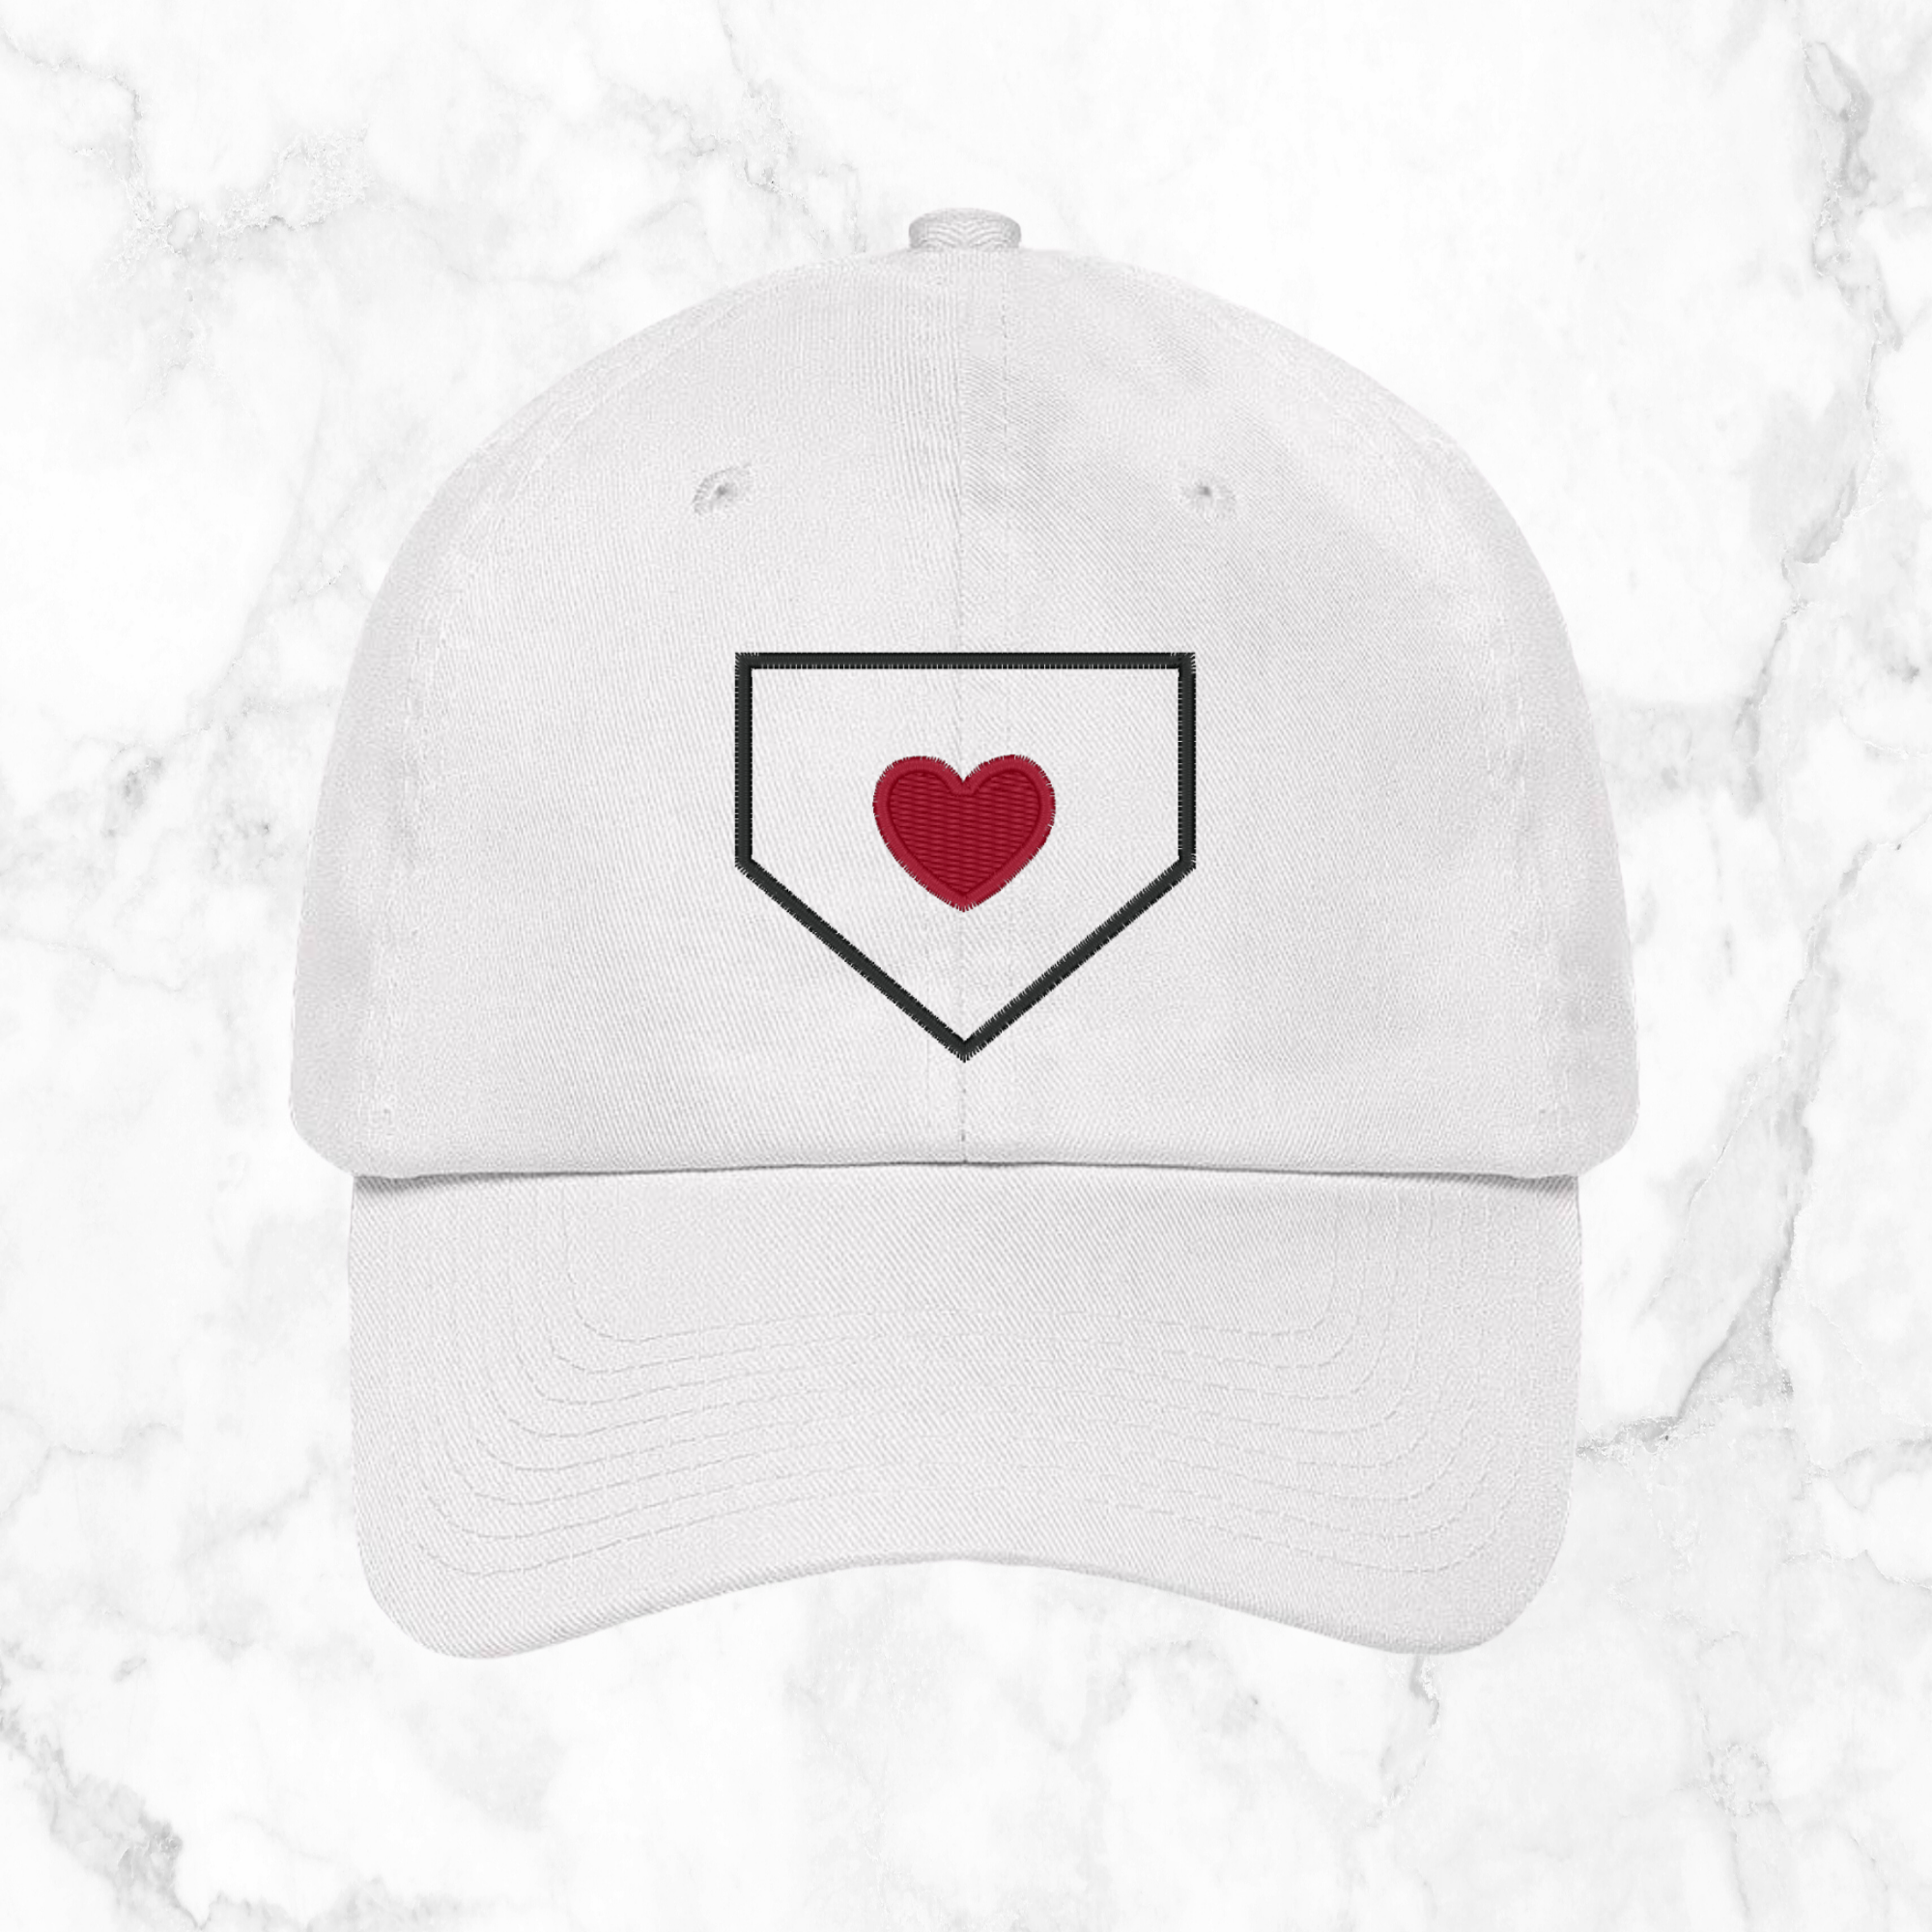 home plate heart | dad hat